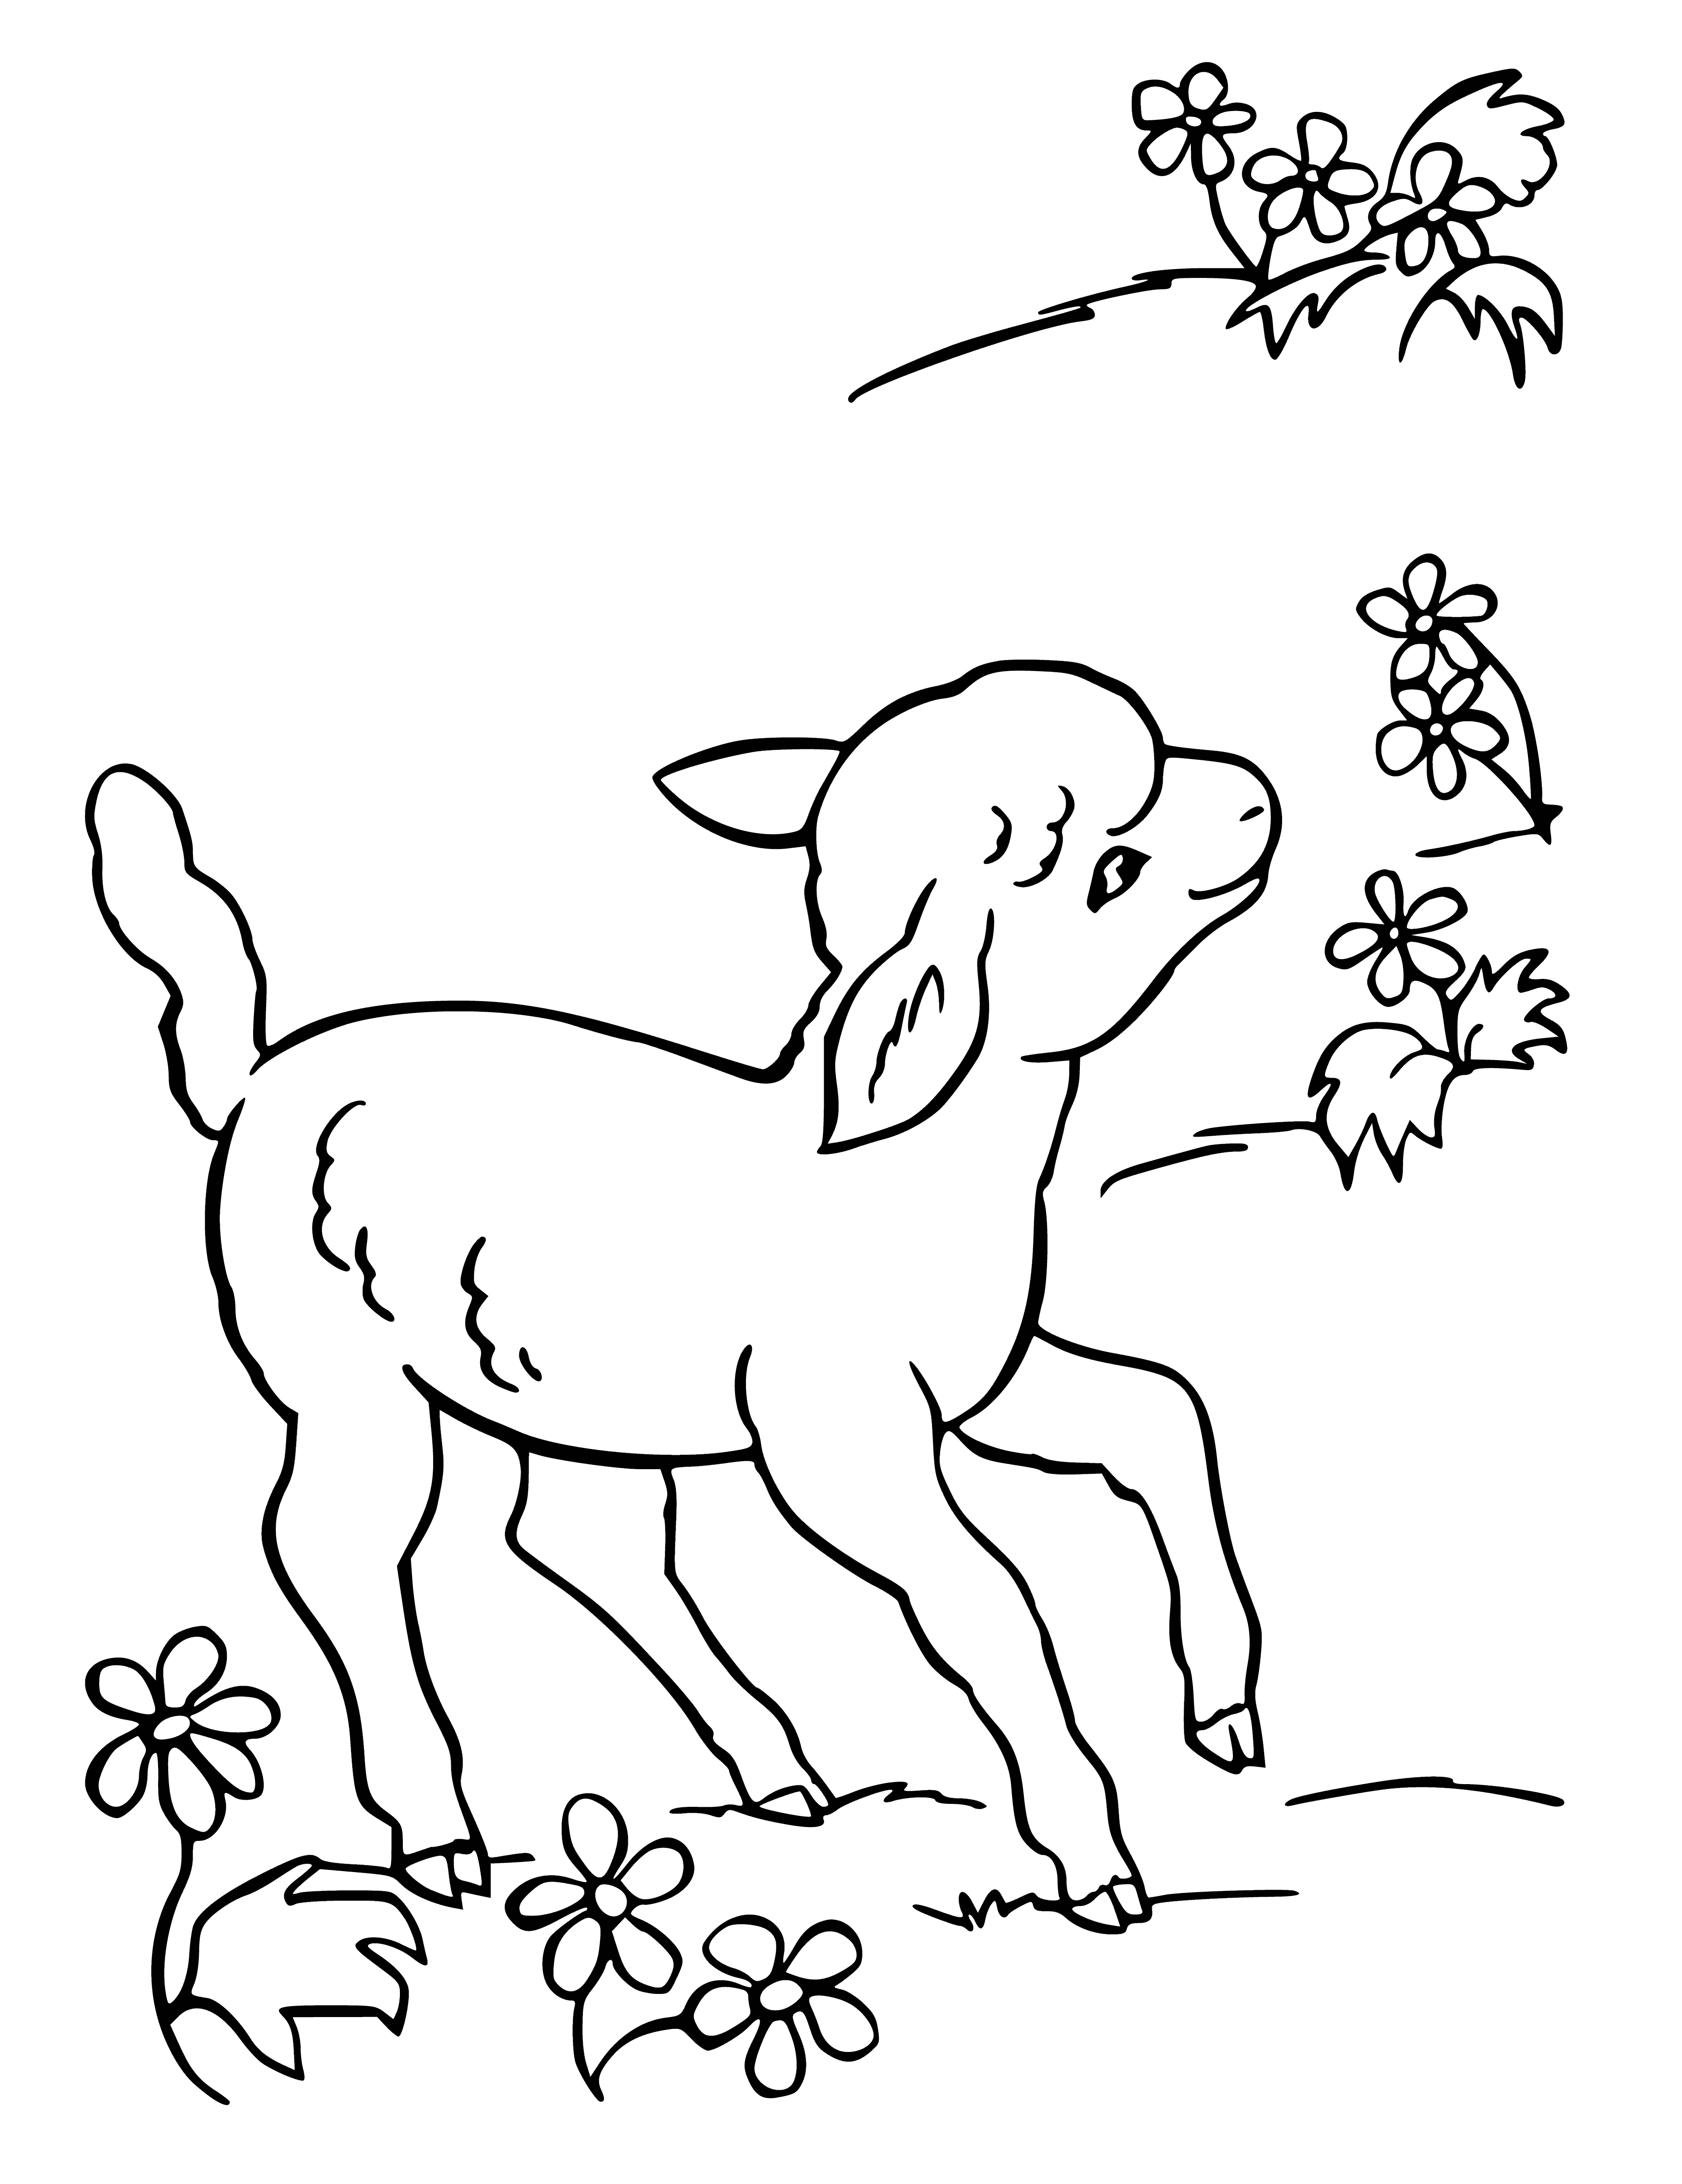 coloring page: Merry sheep have friendly temperaments and thick coats, making them ideal for cold climates.